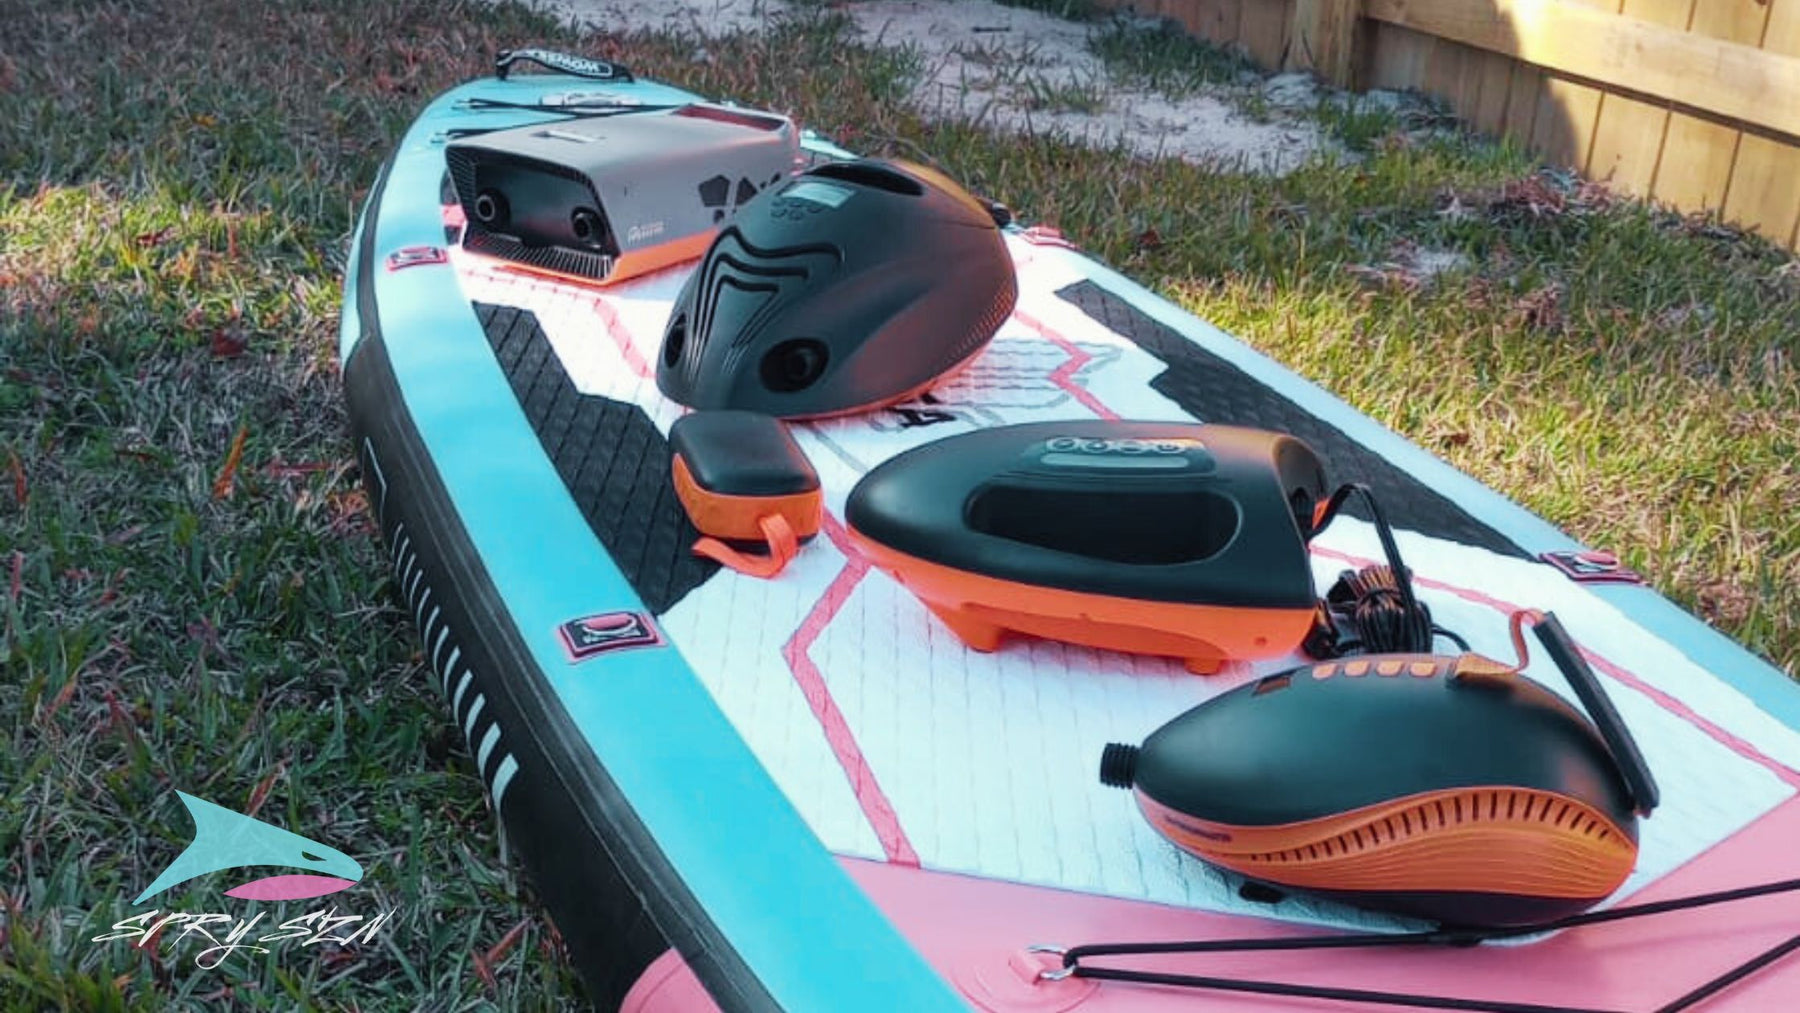 What Outdoor Master electric SUP pump should I buy? Four pumps and one portable power bank on top of a WOWSEA Poseidon P1 Inflatable and affordable paddle board with the SPRY SZN logo on the bottom left.